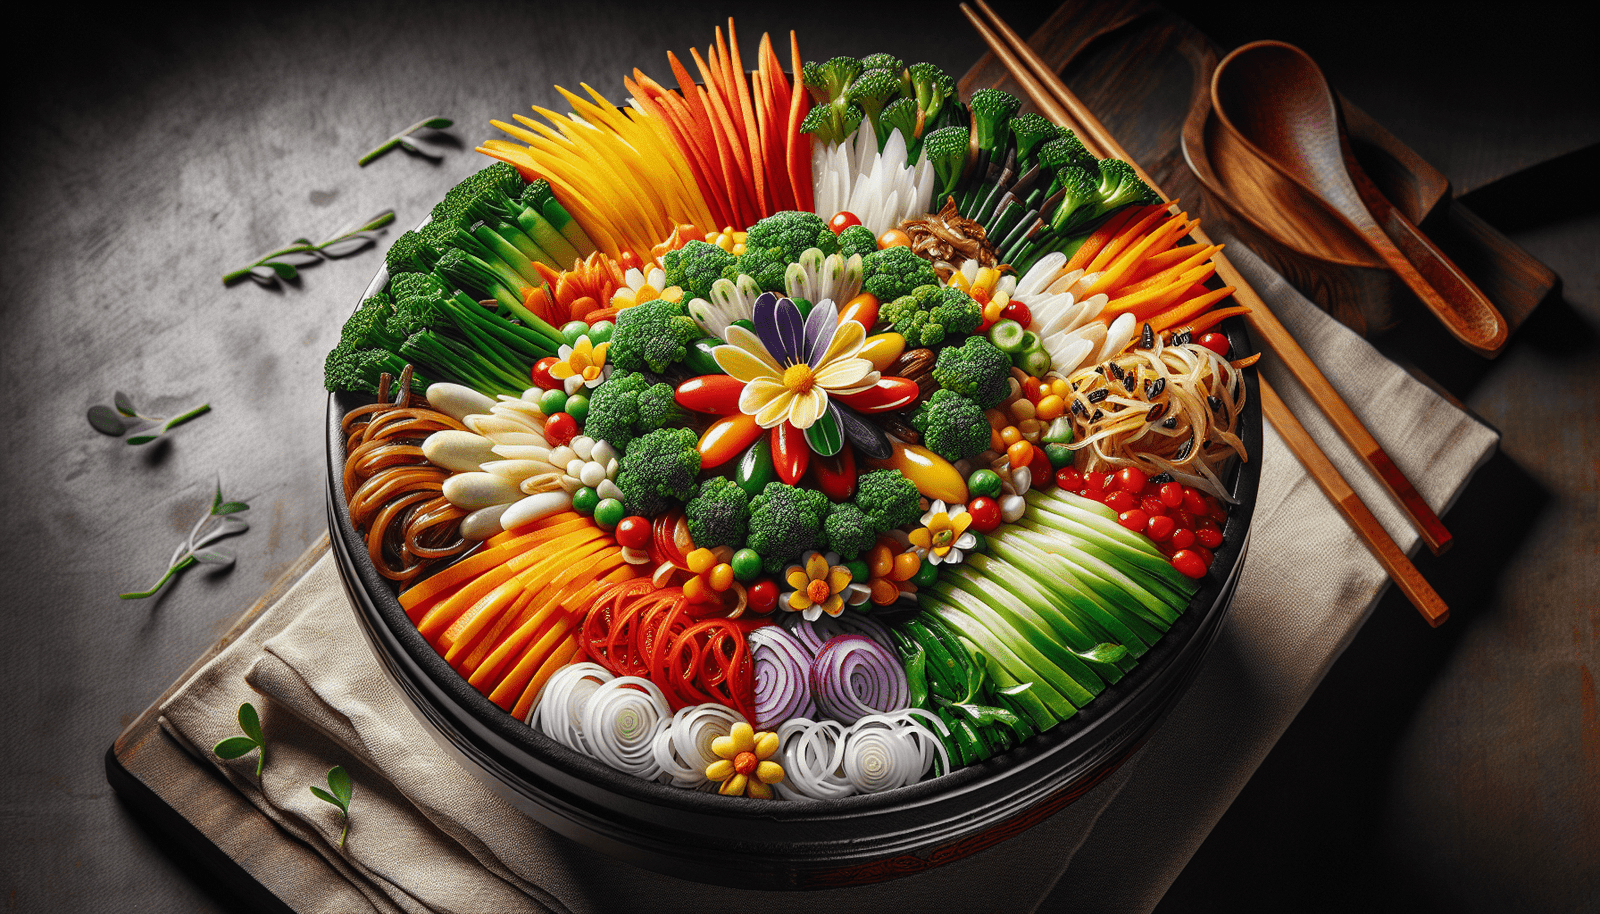 What Are The Current Trends In Creating Visually Appealing Korean Dishes For Social Media?